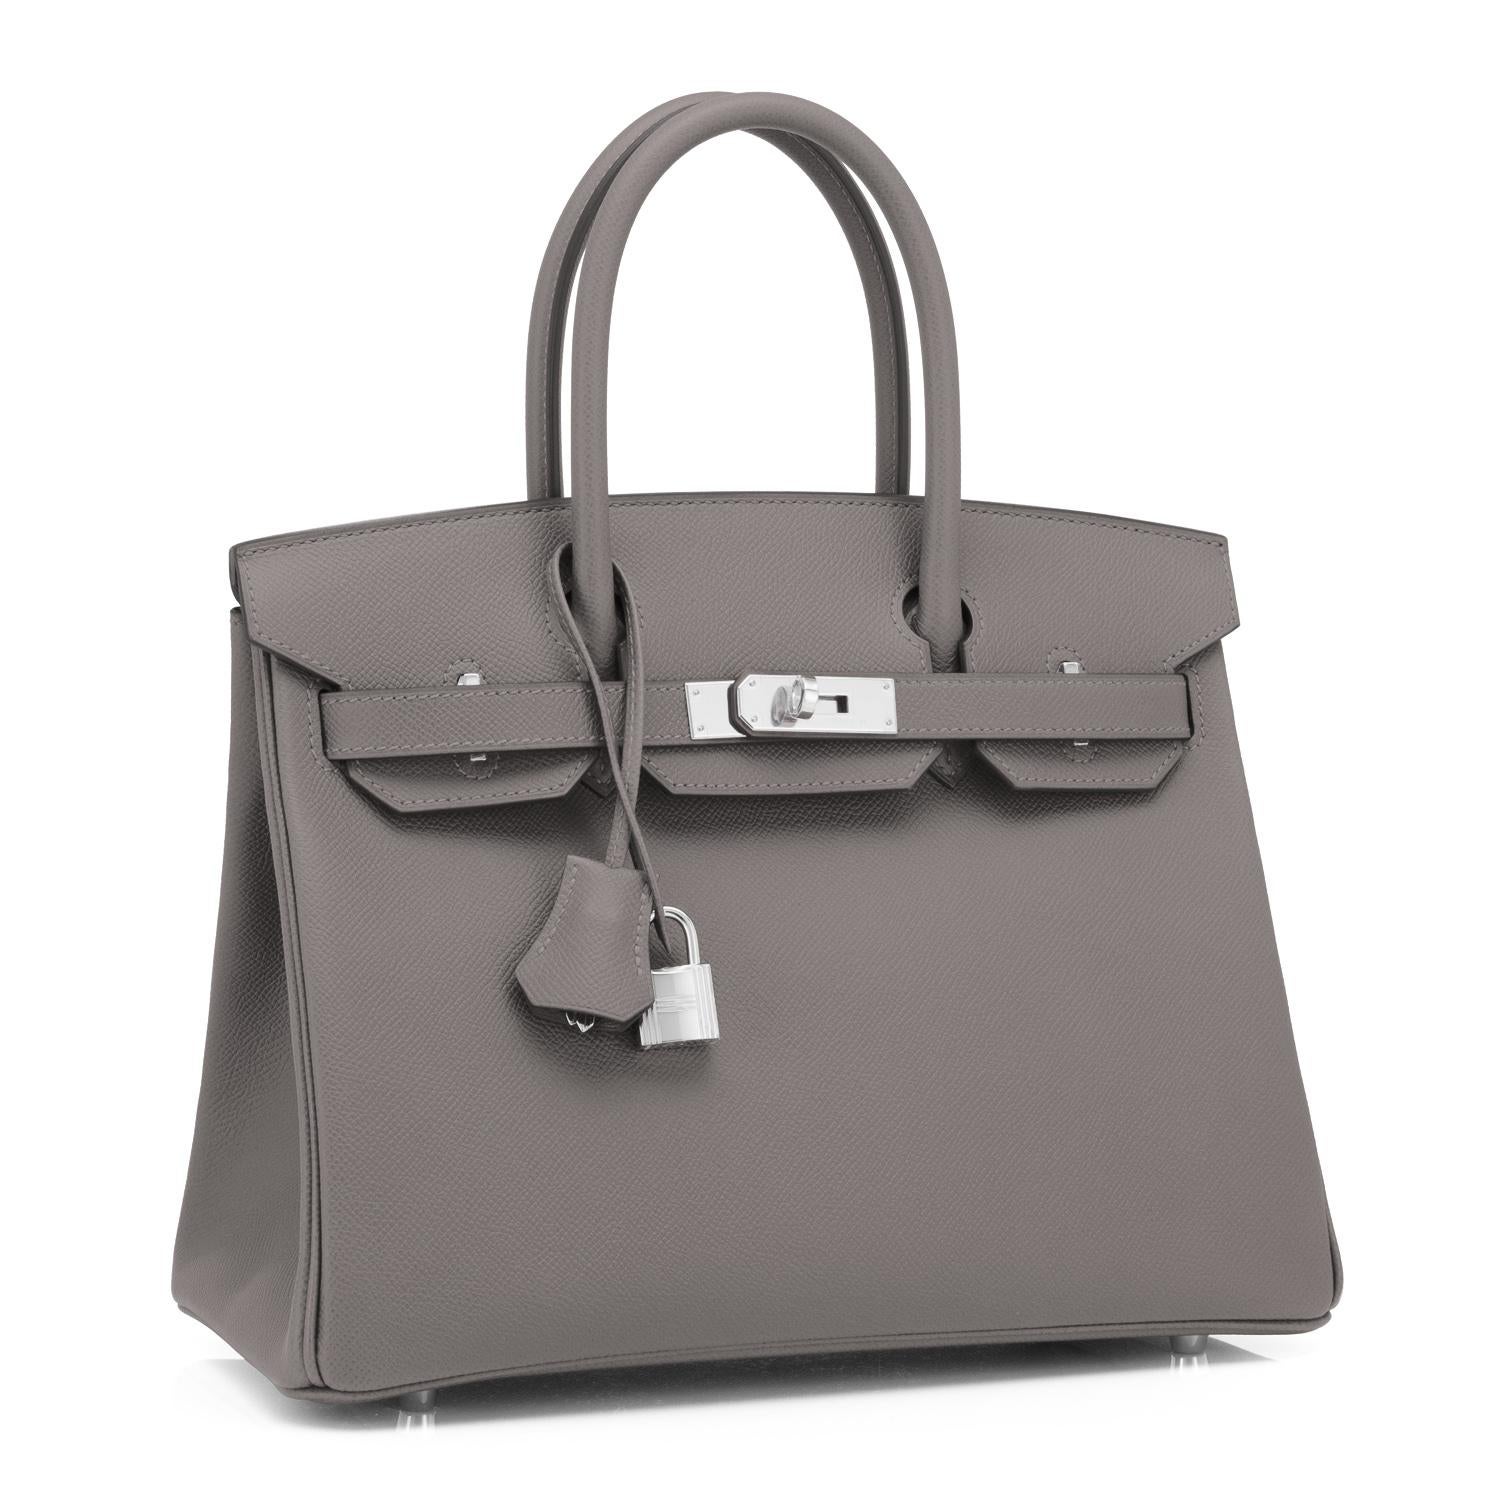 Hermes Birkin 30cm Etain Tin Grey Epsom Palladium Hardware Y Stamp, 2020
Just purchased from Hermes store; bag bears new interior 2020 Y Stamp
Brand New in Box. Store Fresh. Pristine Condition (with plastic on hardware)
Perfect gift! Comes full set